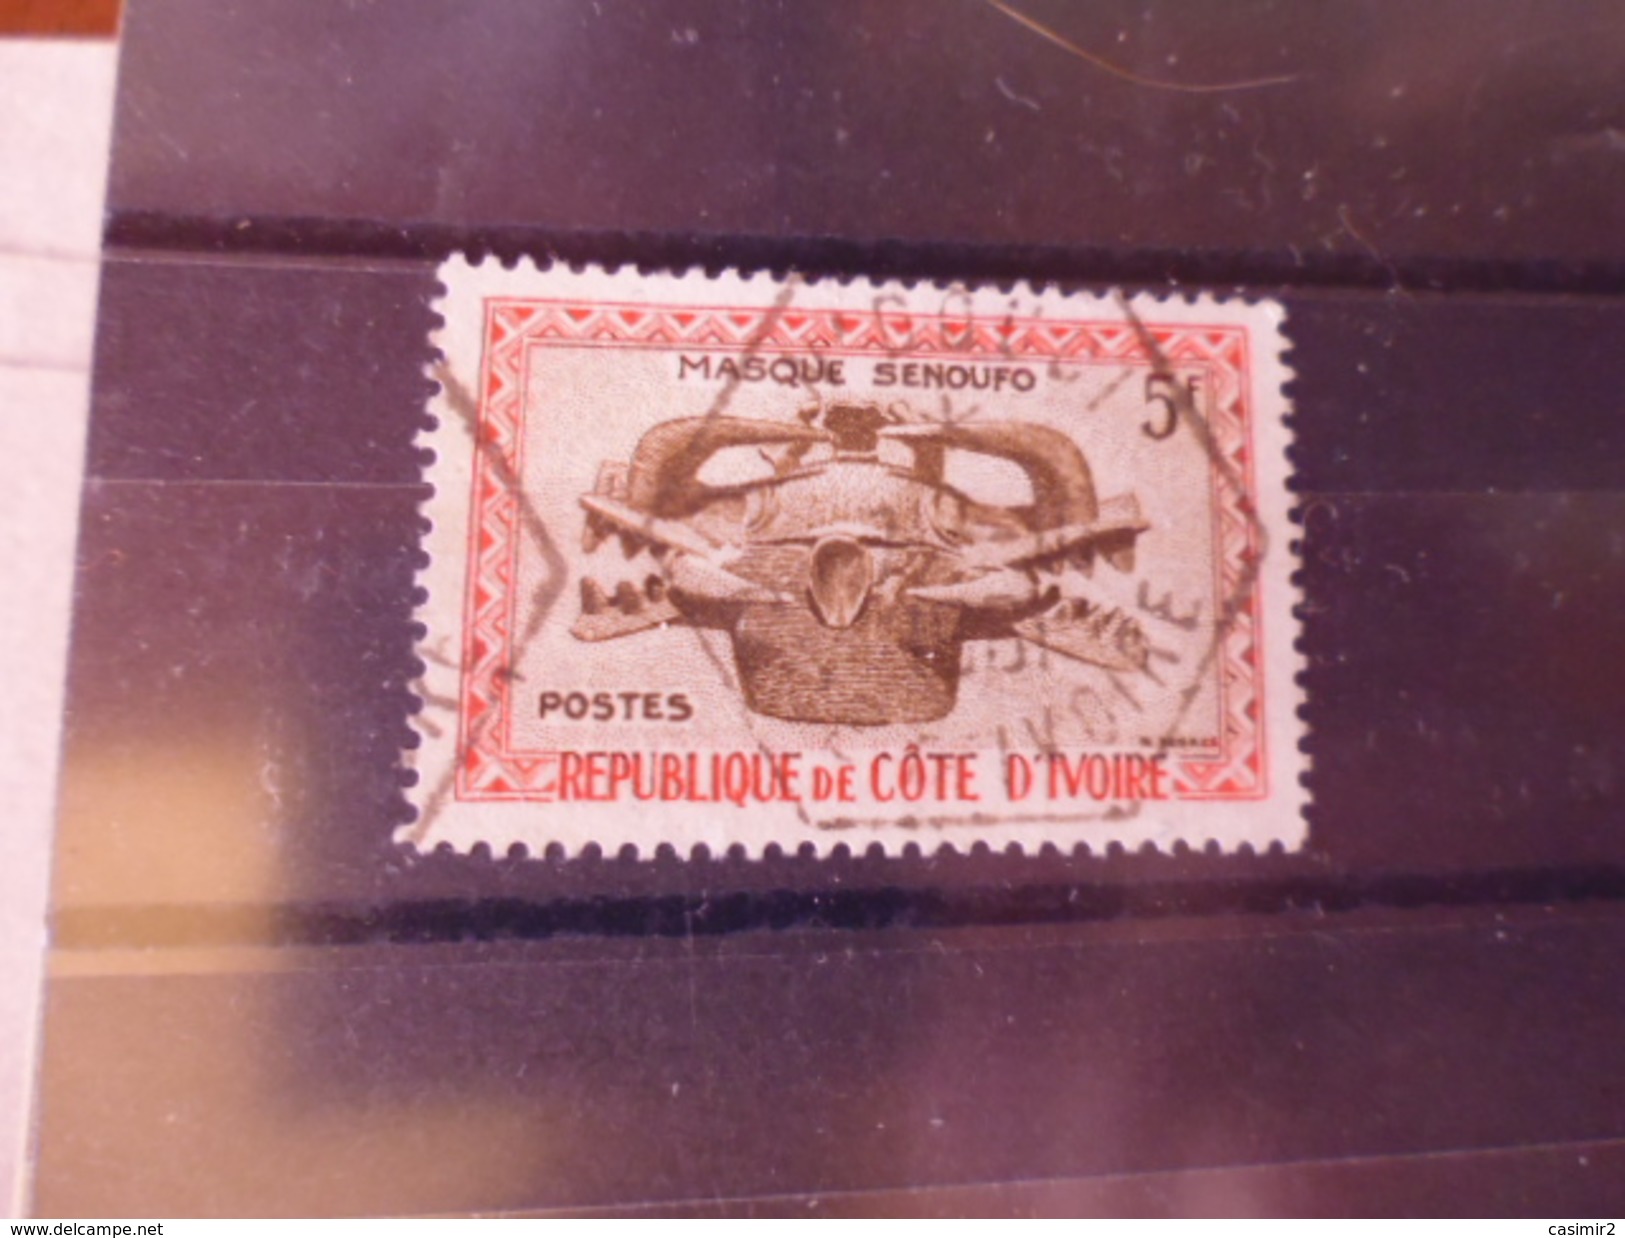 COTE D IVOIRE TIMBRE  REFERENCE YVERT N° 185 - Ivory Coast (1960-...)